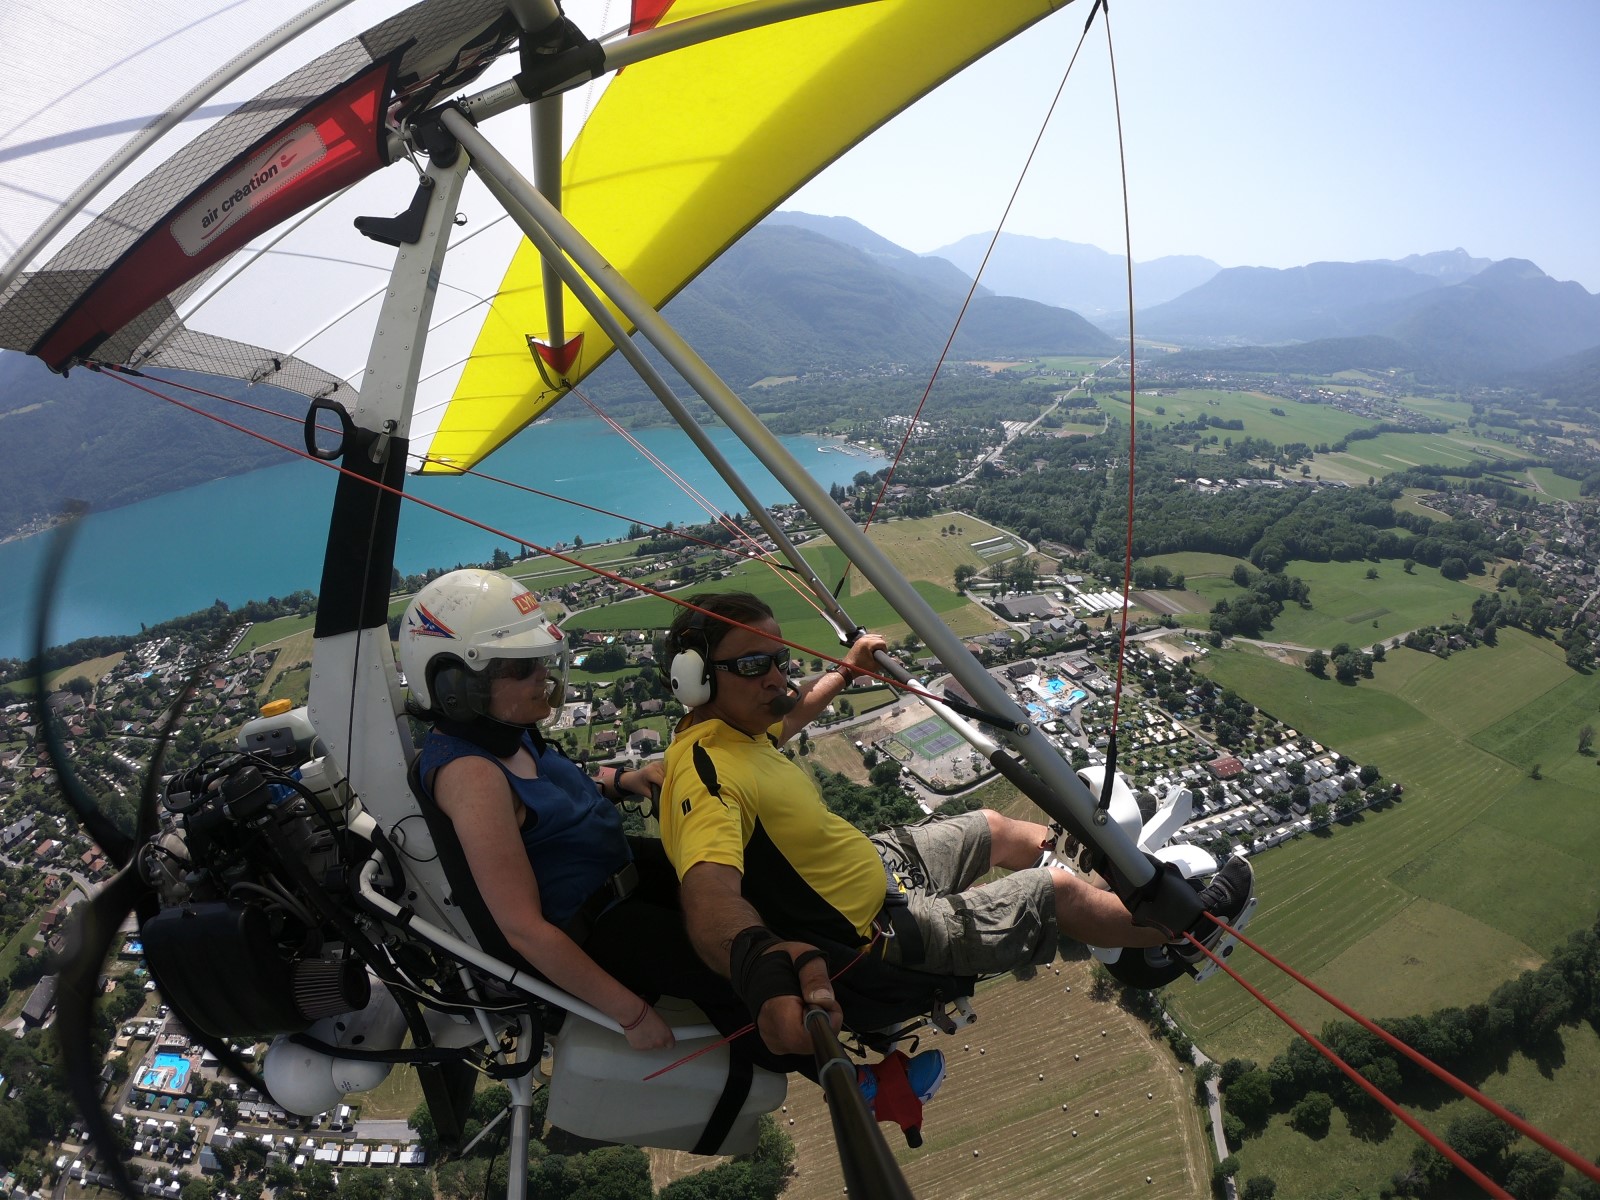 Multi-activities Spring/Summer in Annecy